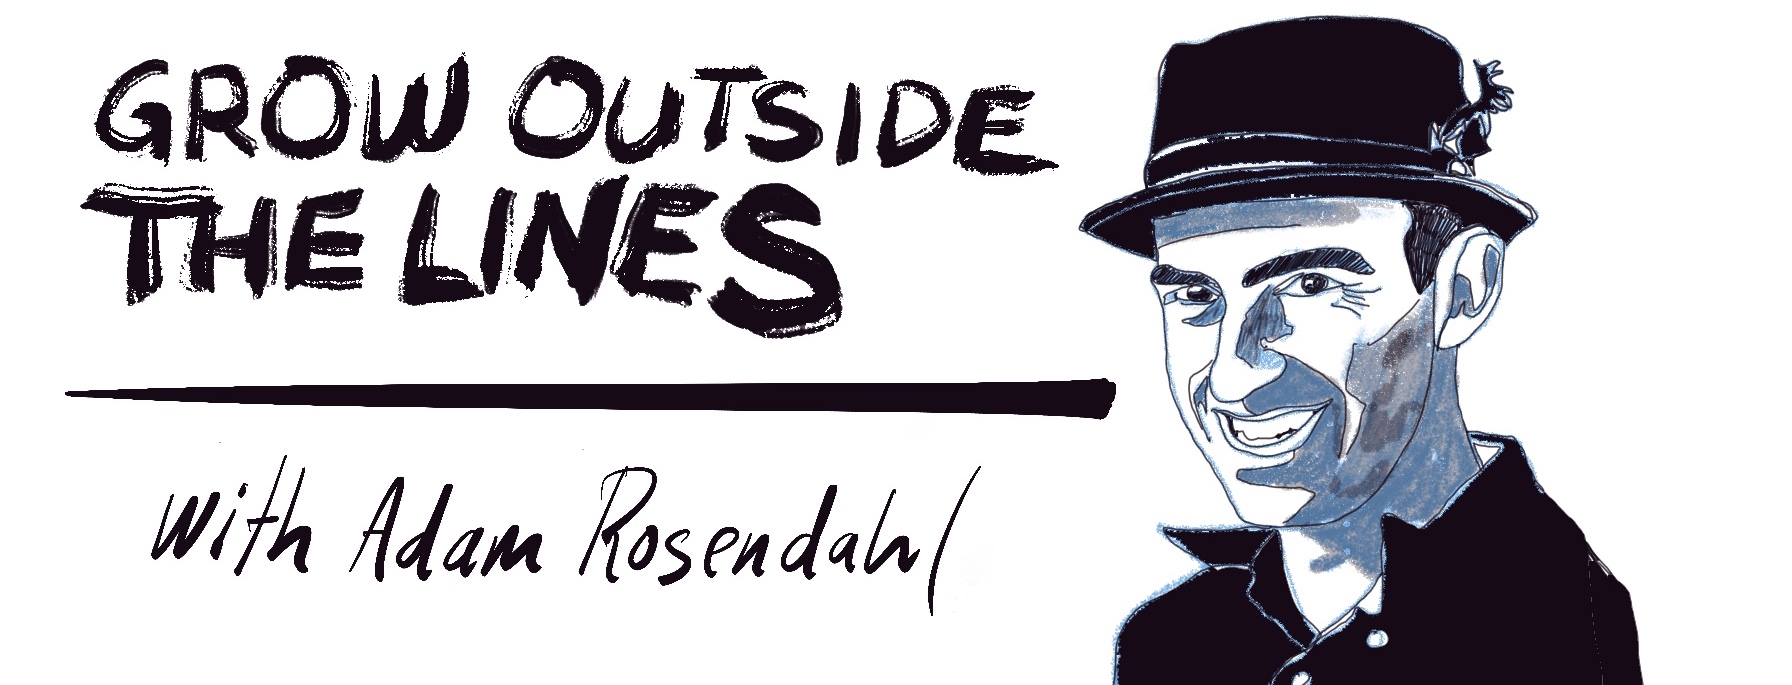 Grow Outside the Lines with Adam Rosendahl